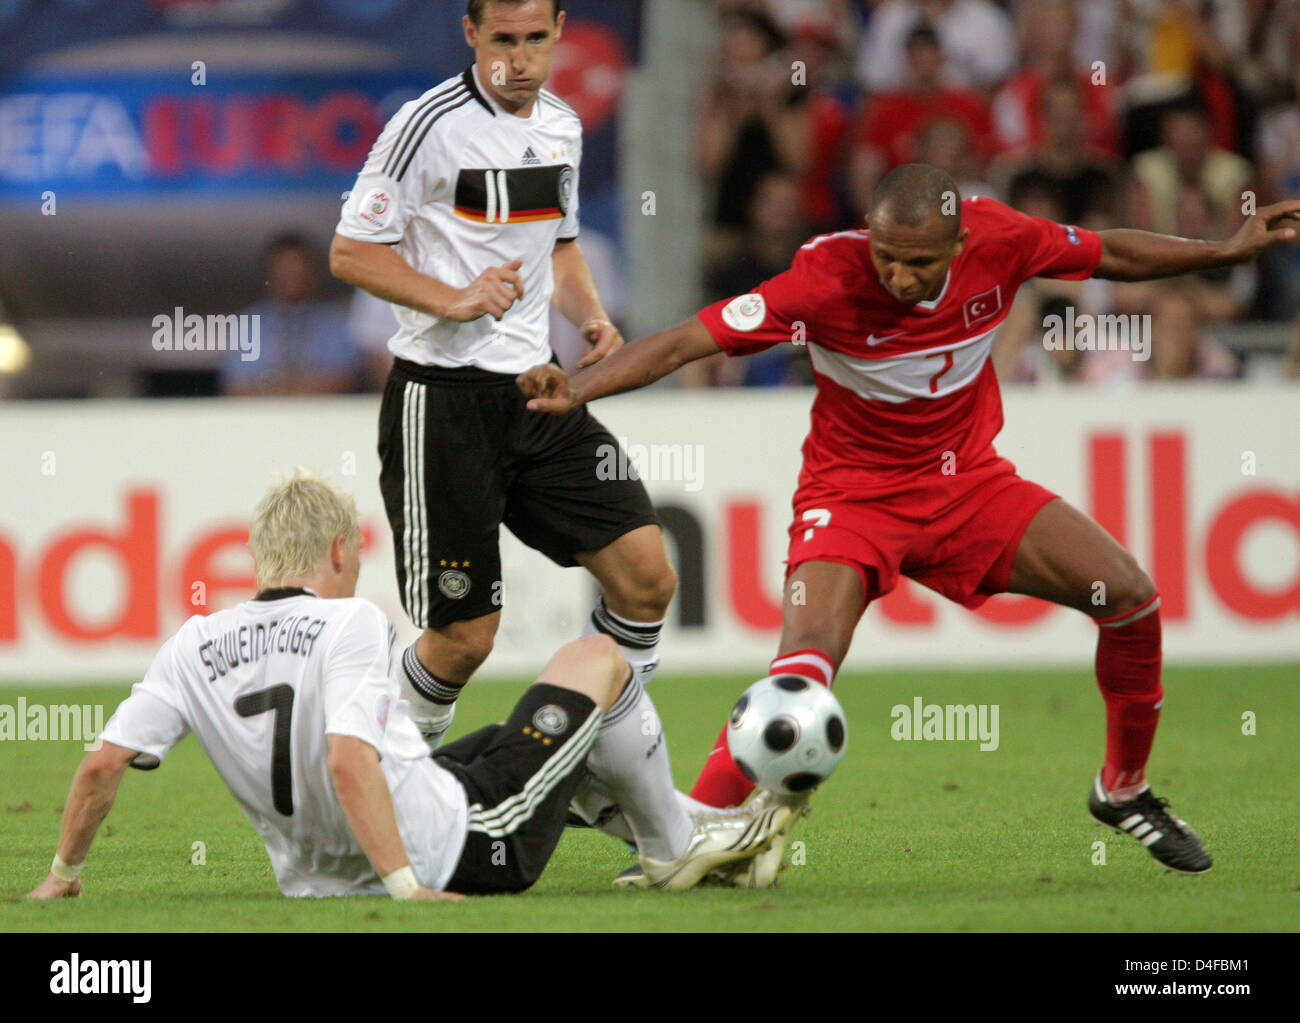 Bastian Schweinsteiger (L) and Miroslav Klos (C) of Germany vie with Mehmet Aurelio of Turkey during the UEFA EURO 2008 semifinal match between Germany and Turkey at the St. Jakob-Park stadium in Basel, Switzerland, 25 June 2008. Photo: Ronald Wittek dpa +please note UEFA restrictions particulary in regard to slide shows and 'No Mobile Services'+ +++(c) dpa - Bildfunk+++ Stock Photo